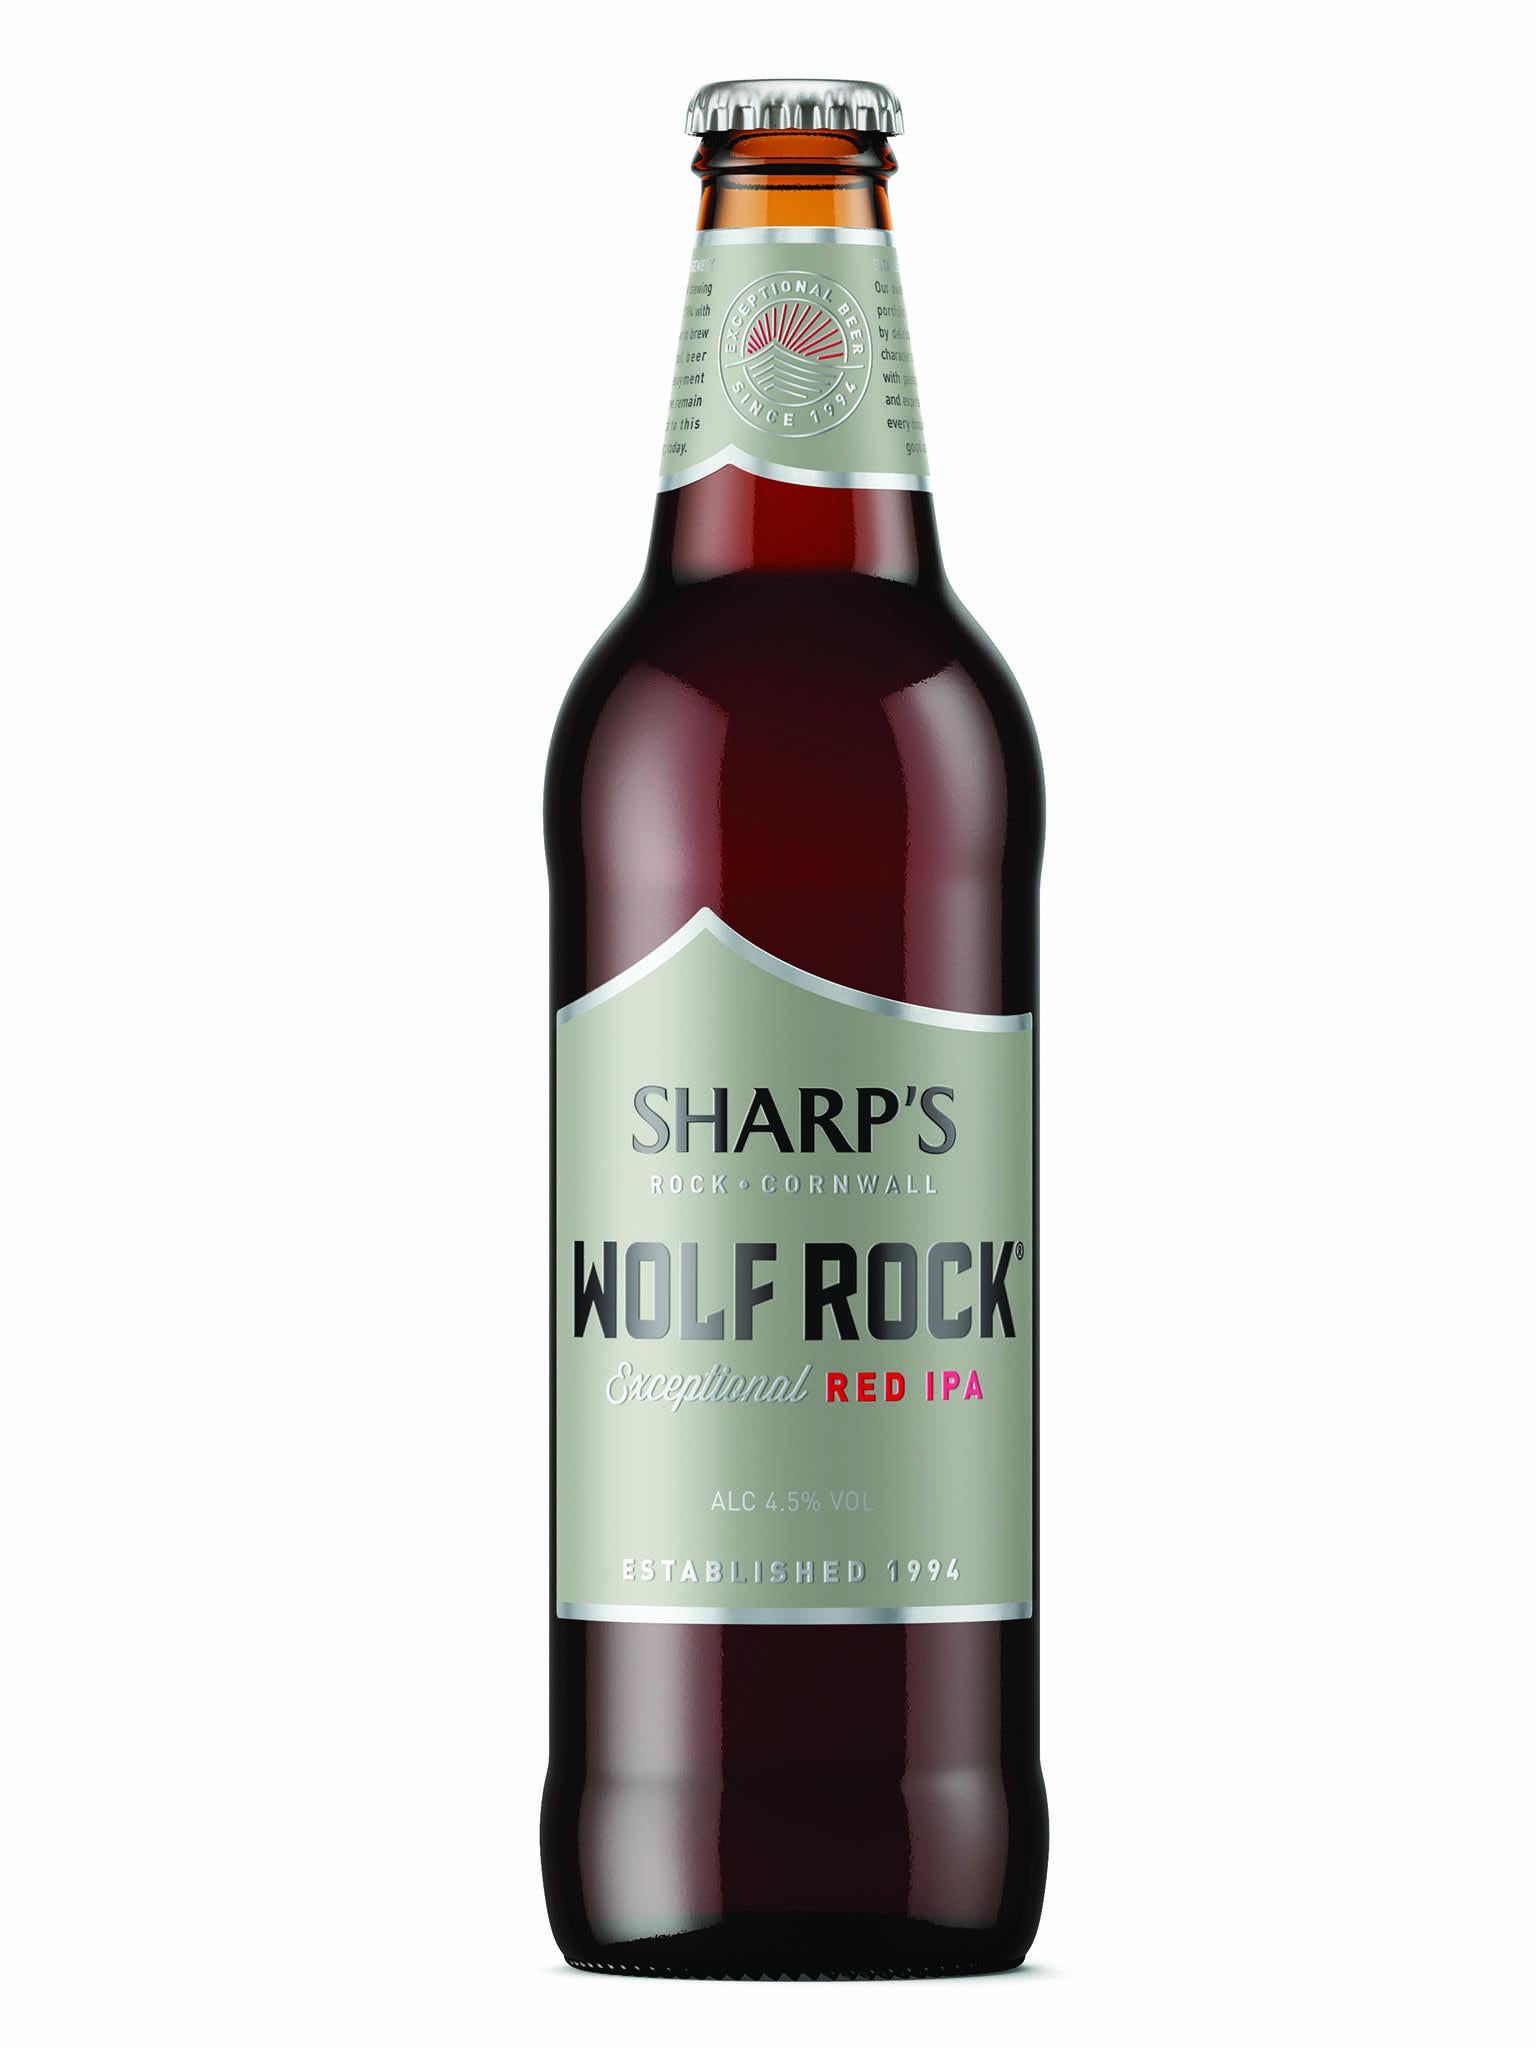 Named after a rock off the coast of Lands' End, the beer is a fusion of red ale and IPA